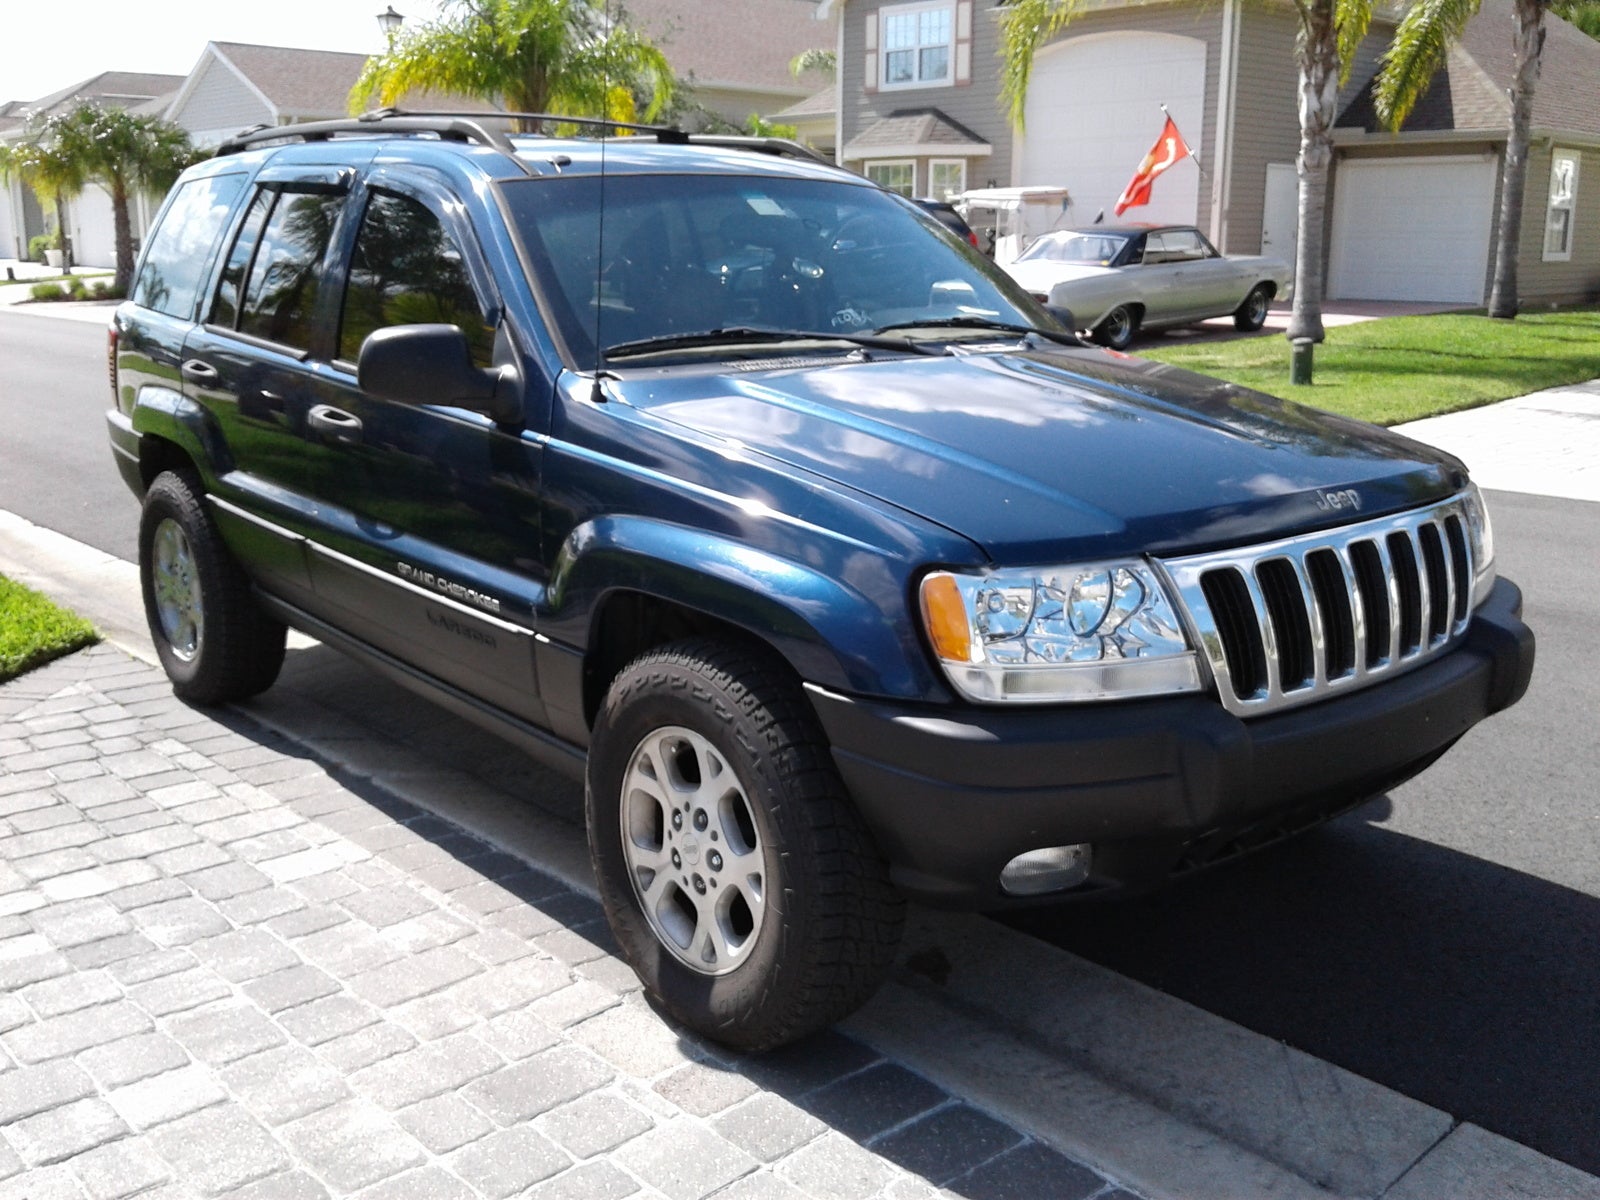 Jeep Grand Cherokee Questions - Rims and tires for 06 jeep grand cherokee -  CarGurus